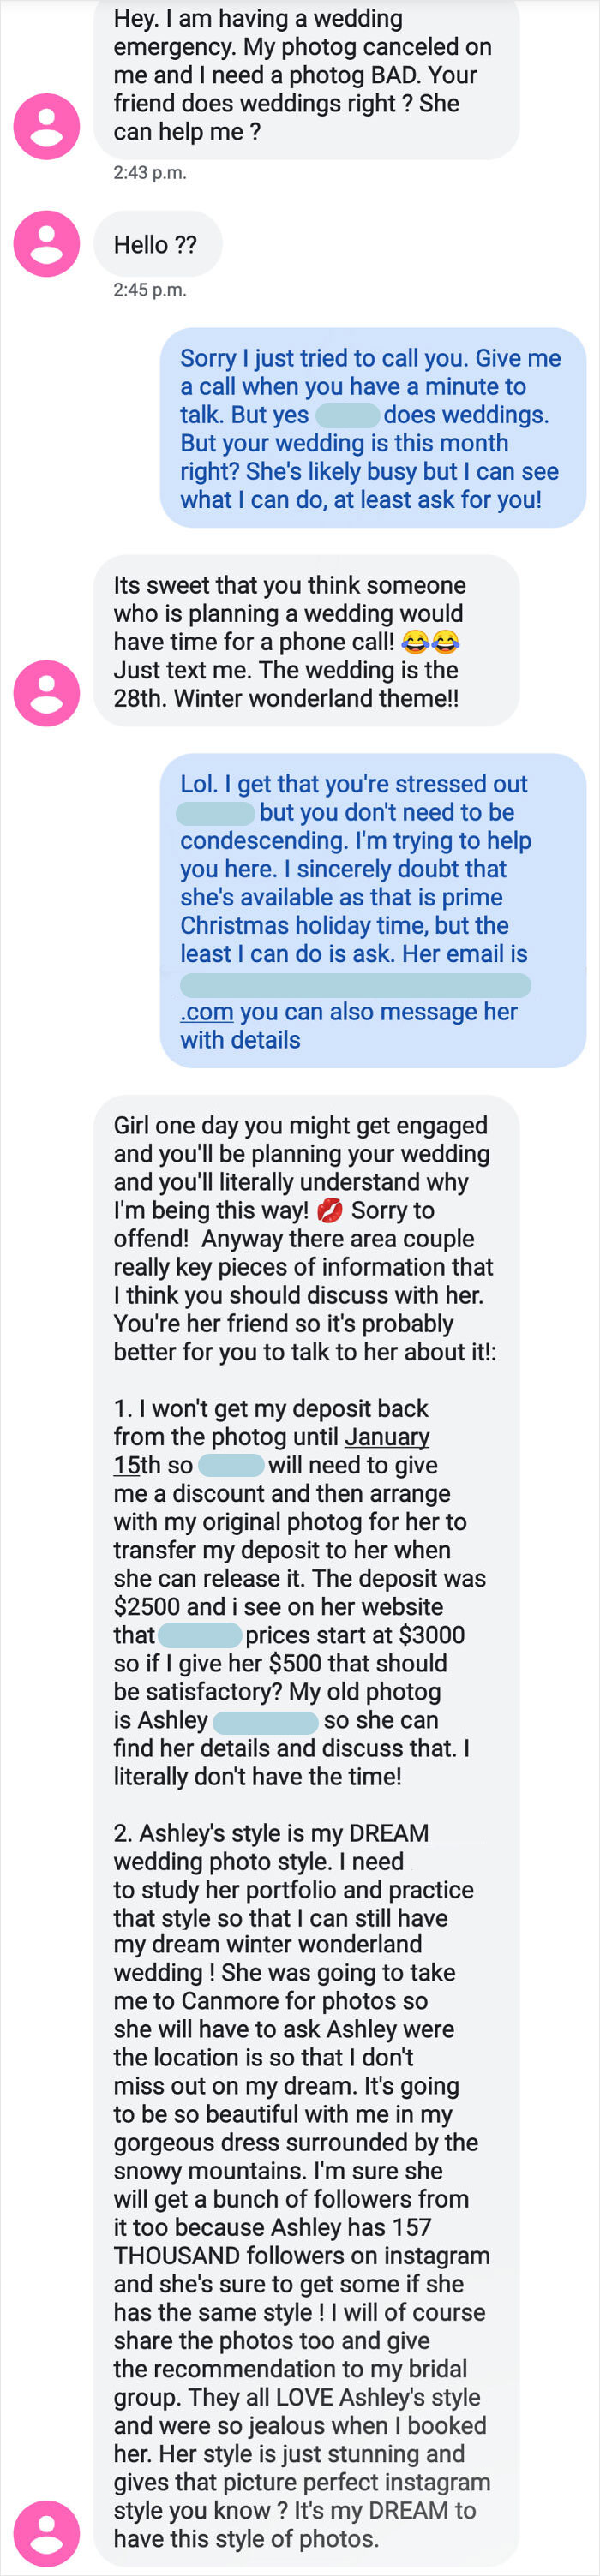 Bride Wants My Photographer Friend To Learn Another Photographer's "Style" And Basically Give Her A Discount For A Wedding That's In A Couple Of Weeks